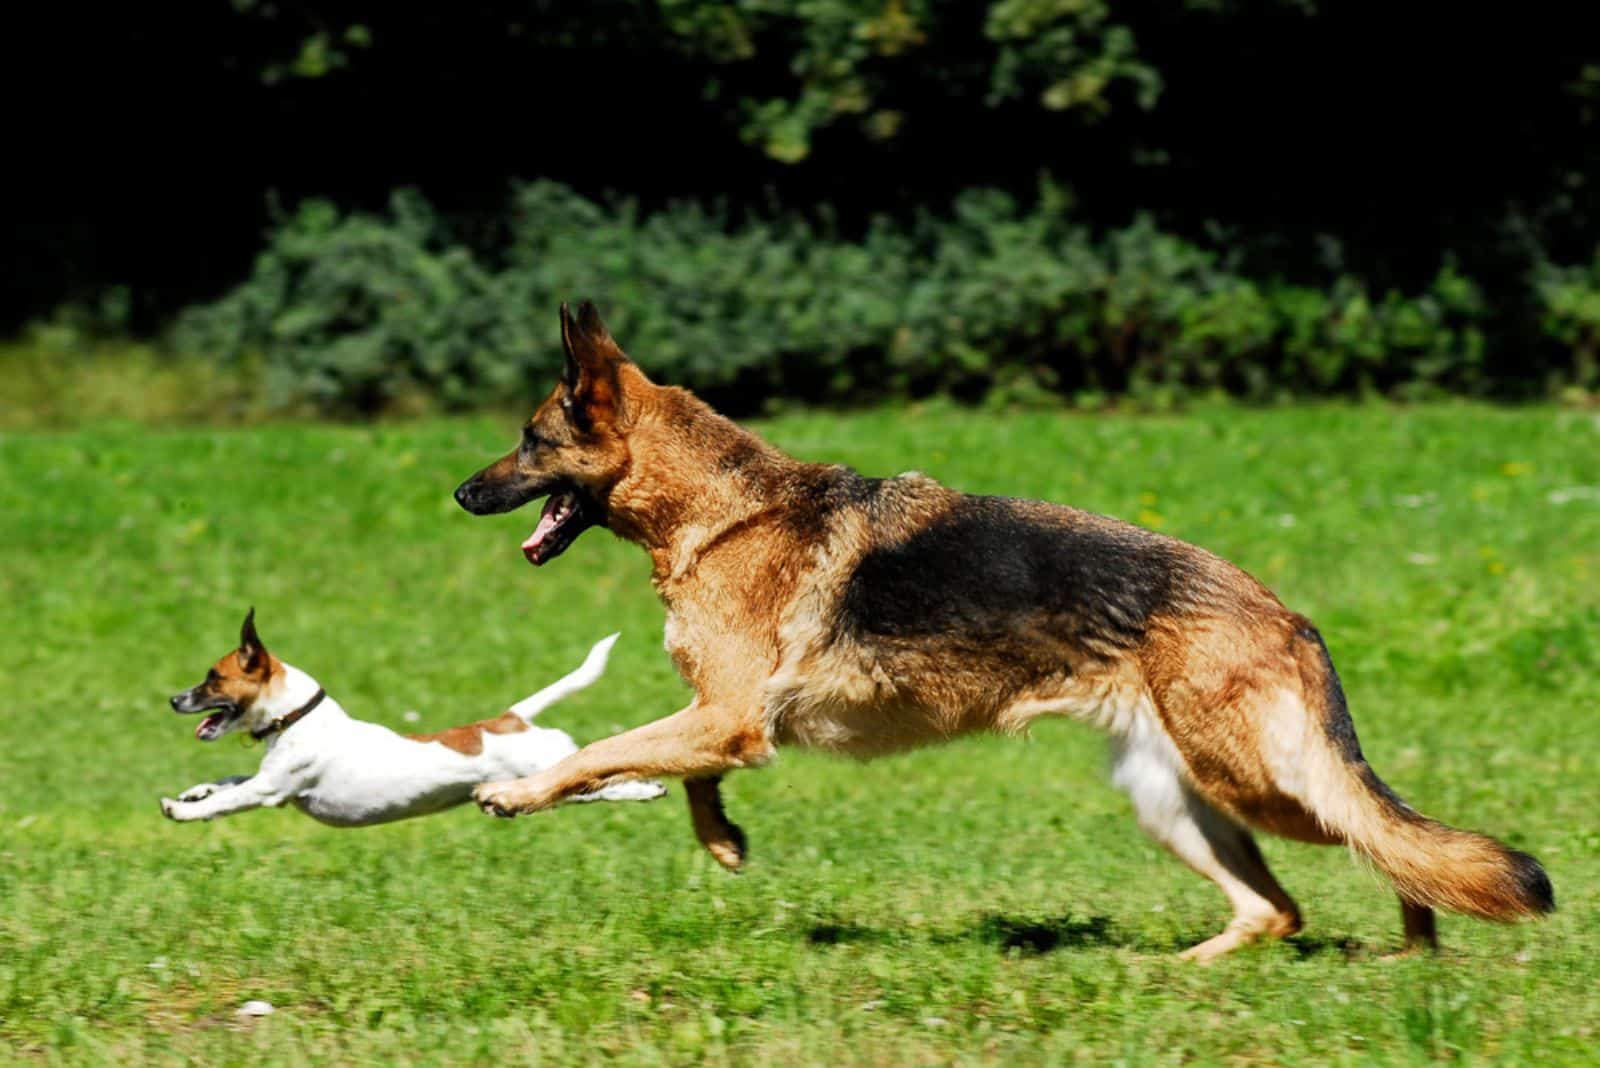 terrier and a german shepherd dog running together